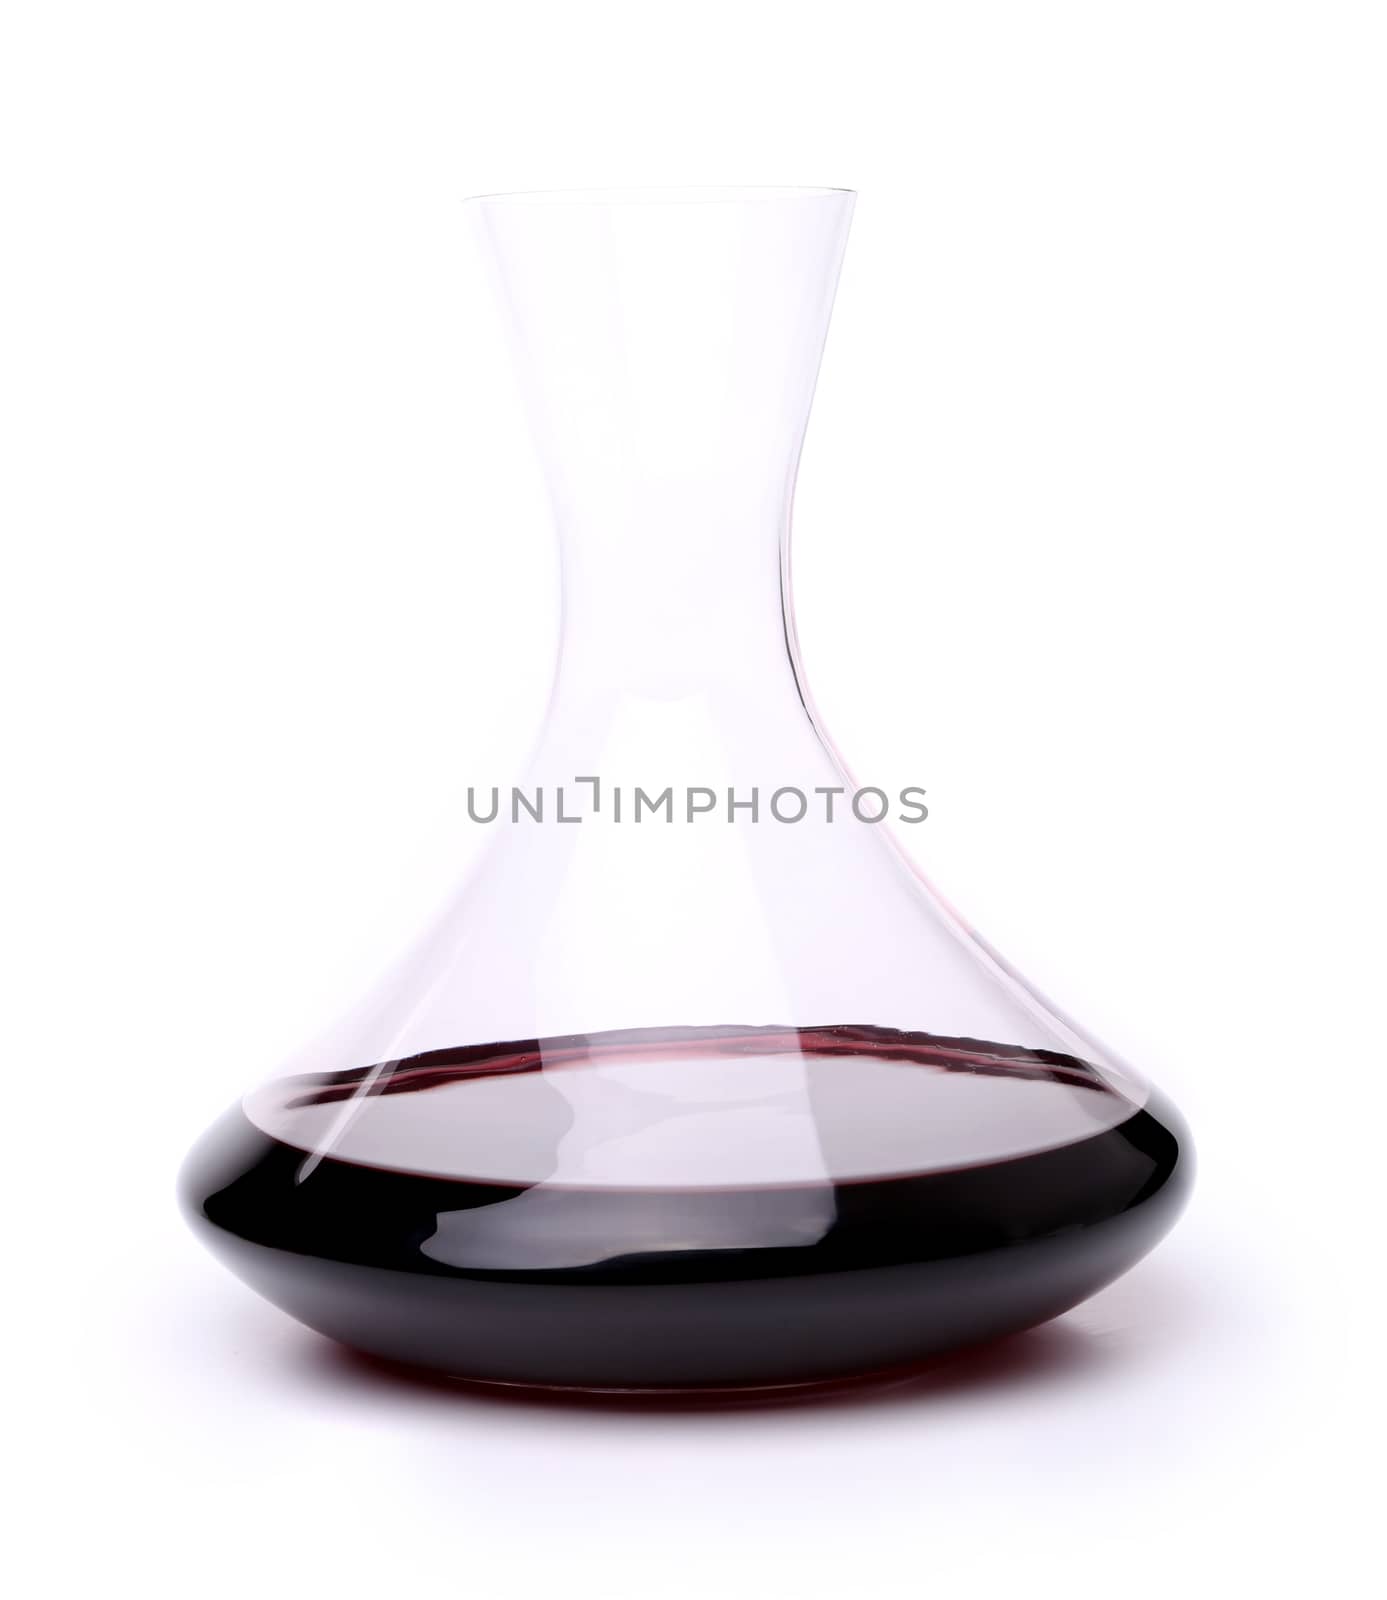 A decanter of red wine isolated over white background by indigolotos